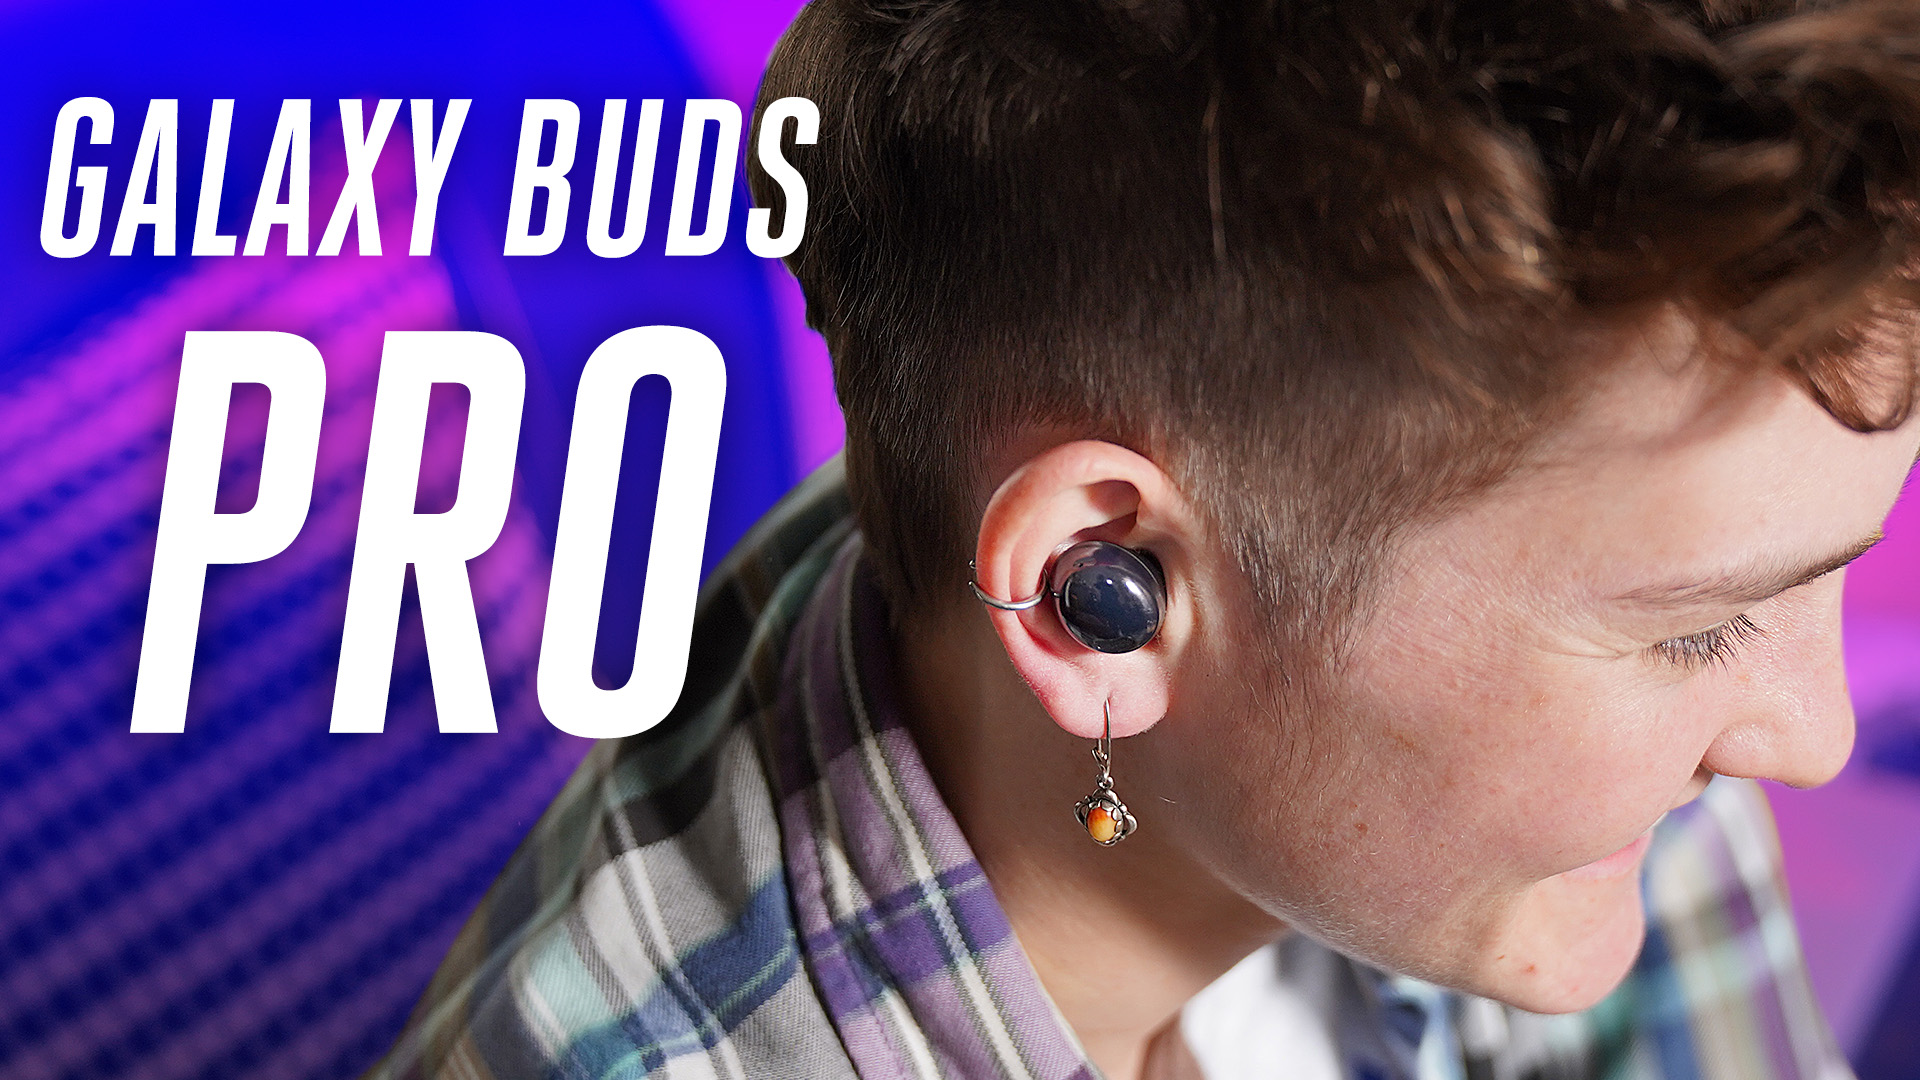 Samsung Galaxy Buds Pro review: the right balance - The Verge